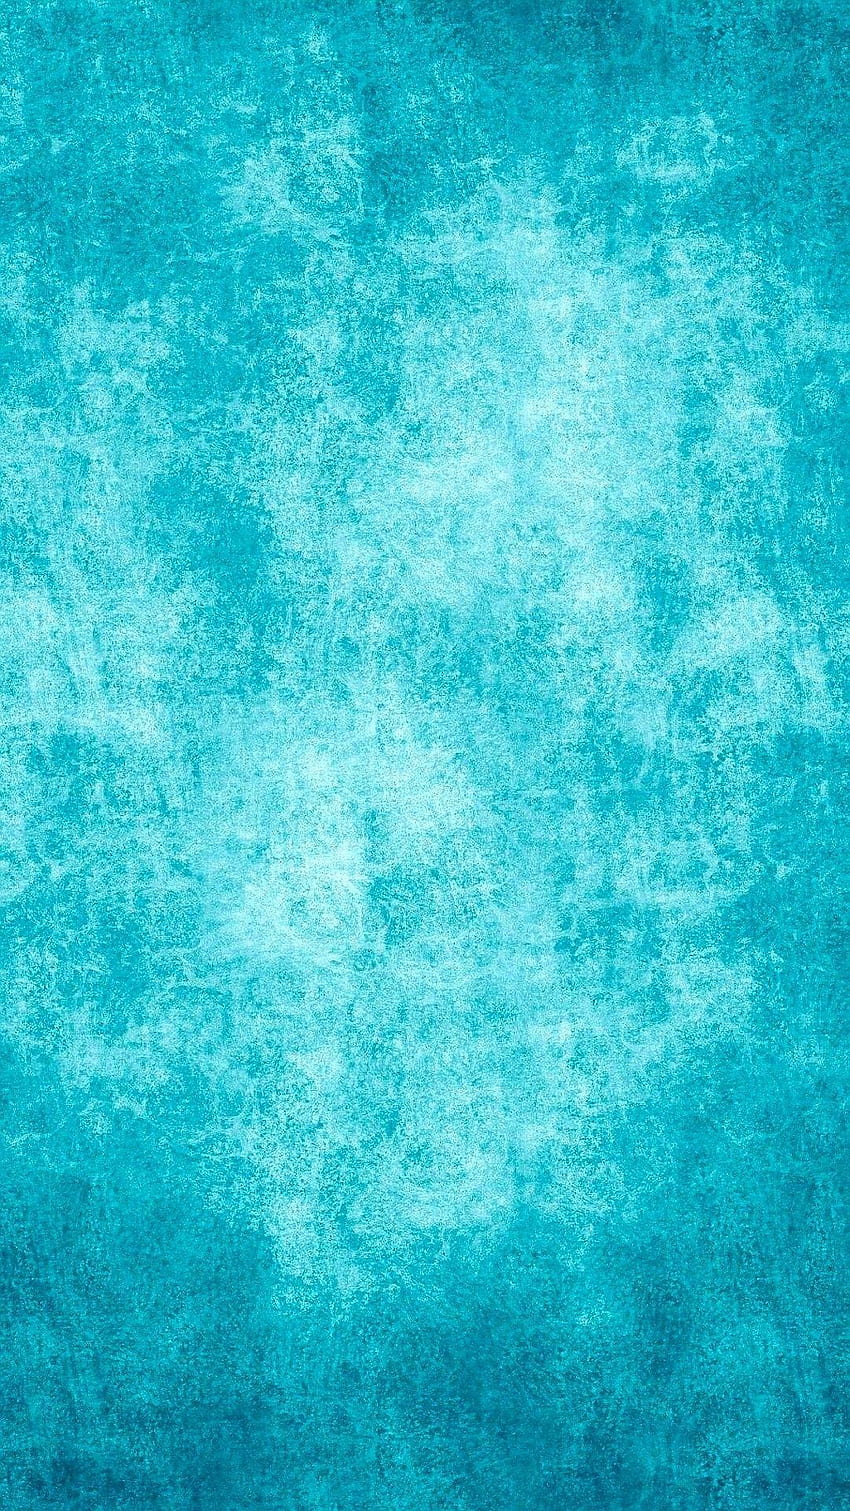 Teal iPhone, Cool Turquoise Abstract HD phone wallpaper